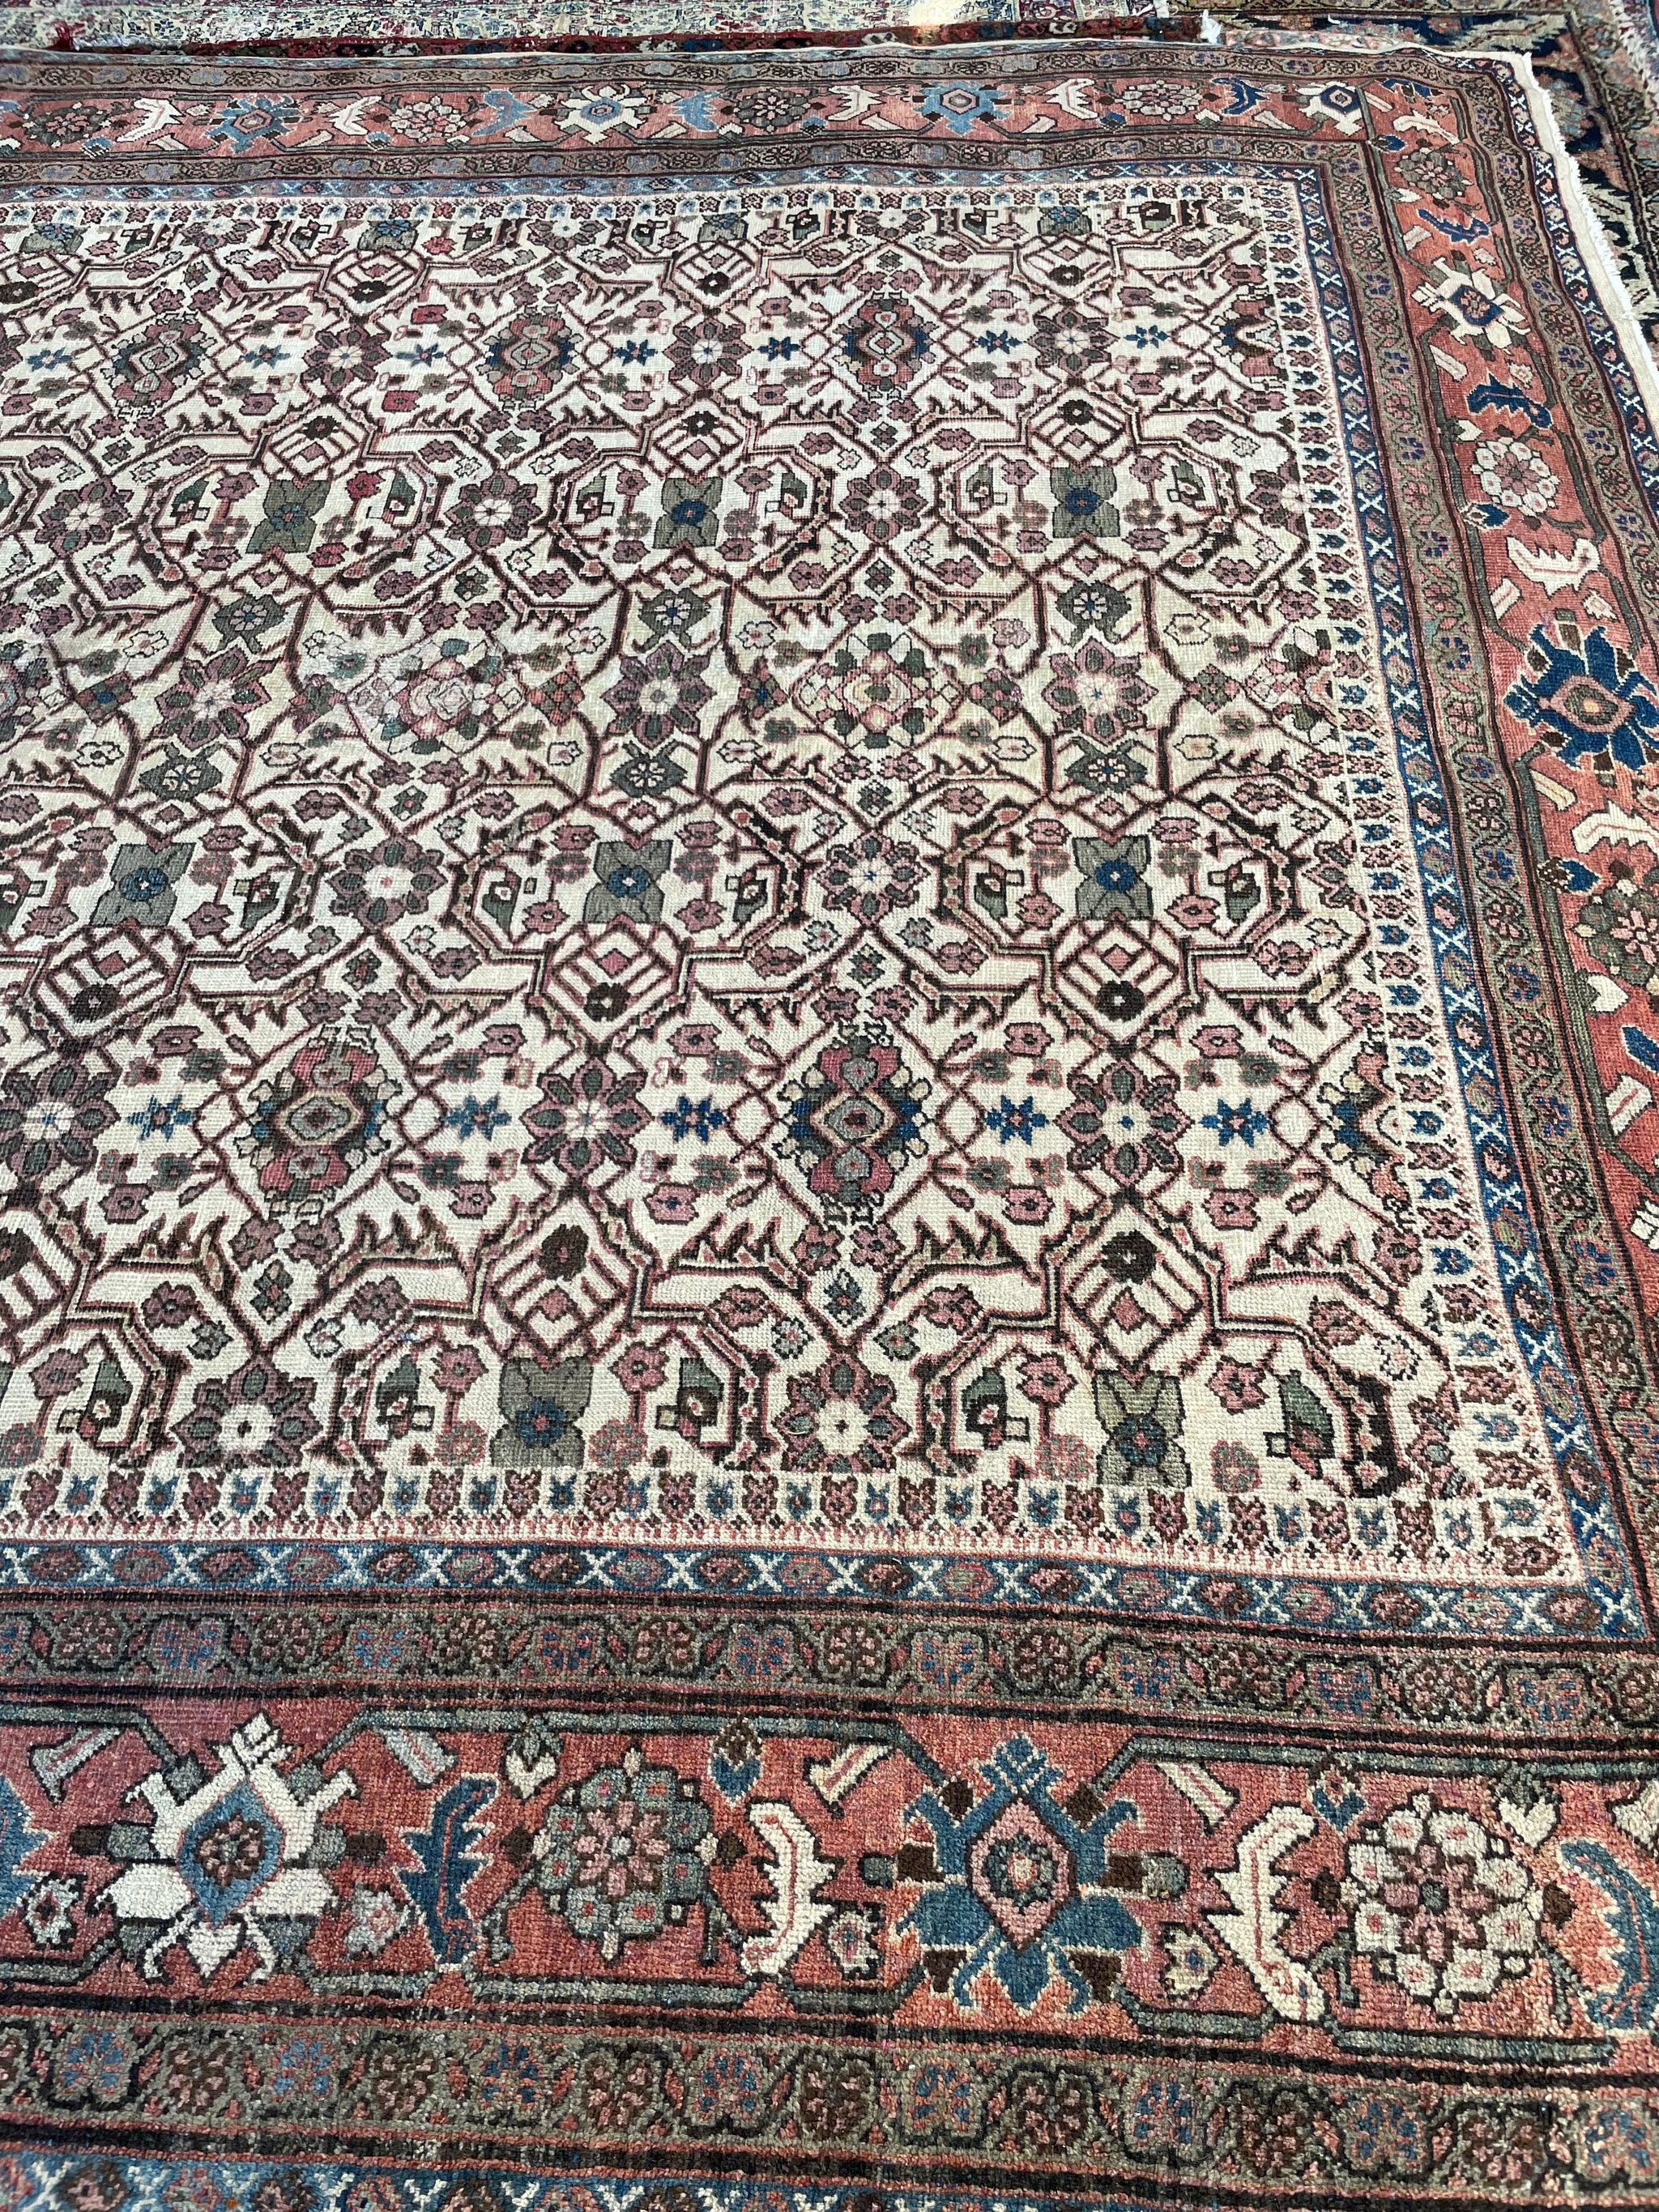 Fantastic Antique Beauty with Intricate Geometric Vines & Dustry Army, Sage, Olive, And Moss Greens

Size: 8.6 x 12
Age: Antique, C. 1930's
Pile: Low/Medium with great age-related patina and minor responsible areas of touch-ups etc. 

This rug is